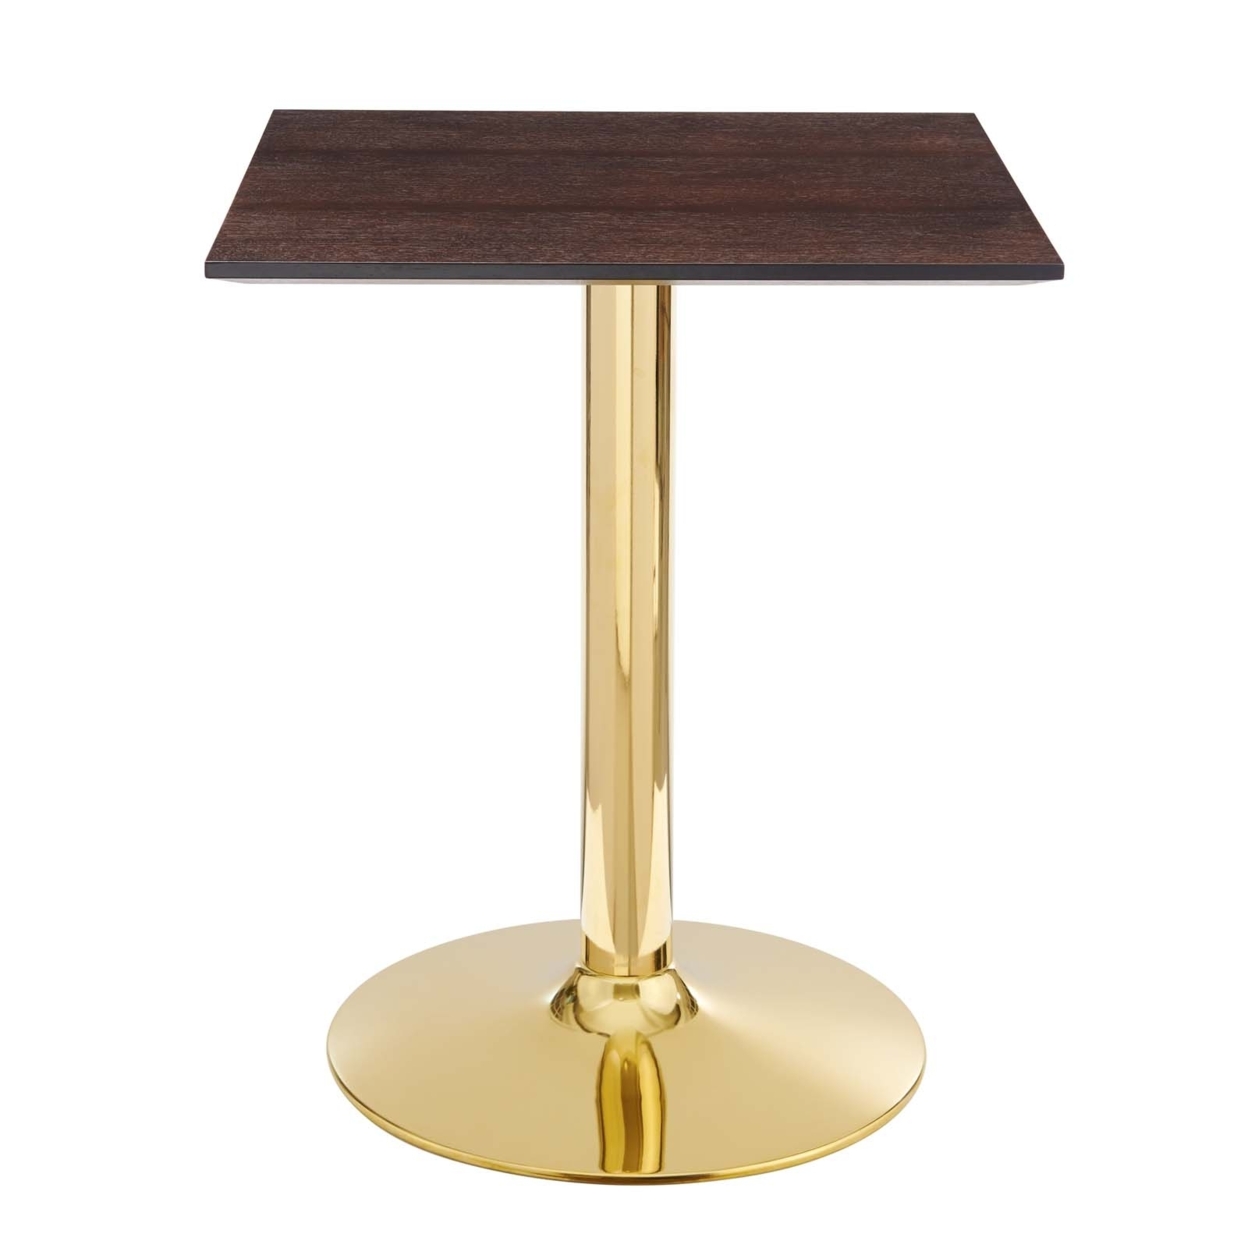 Verne 24 Square Dining Table, Gold Cherry Walnut